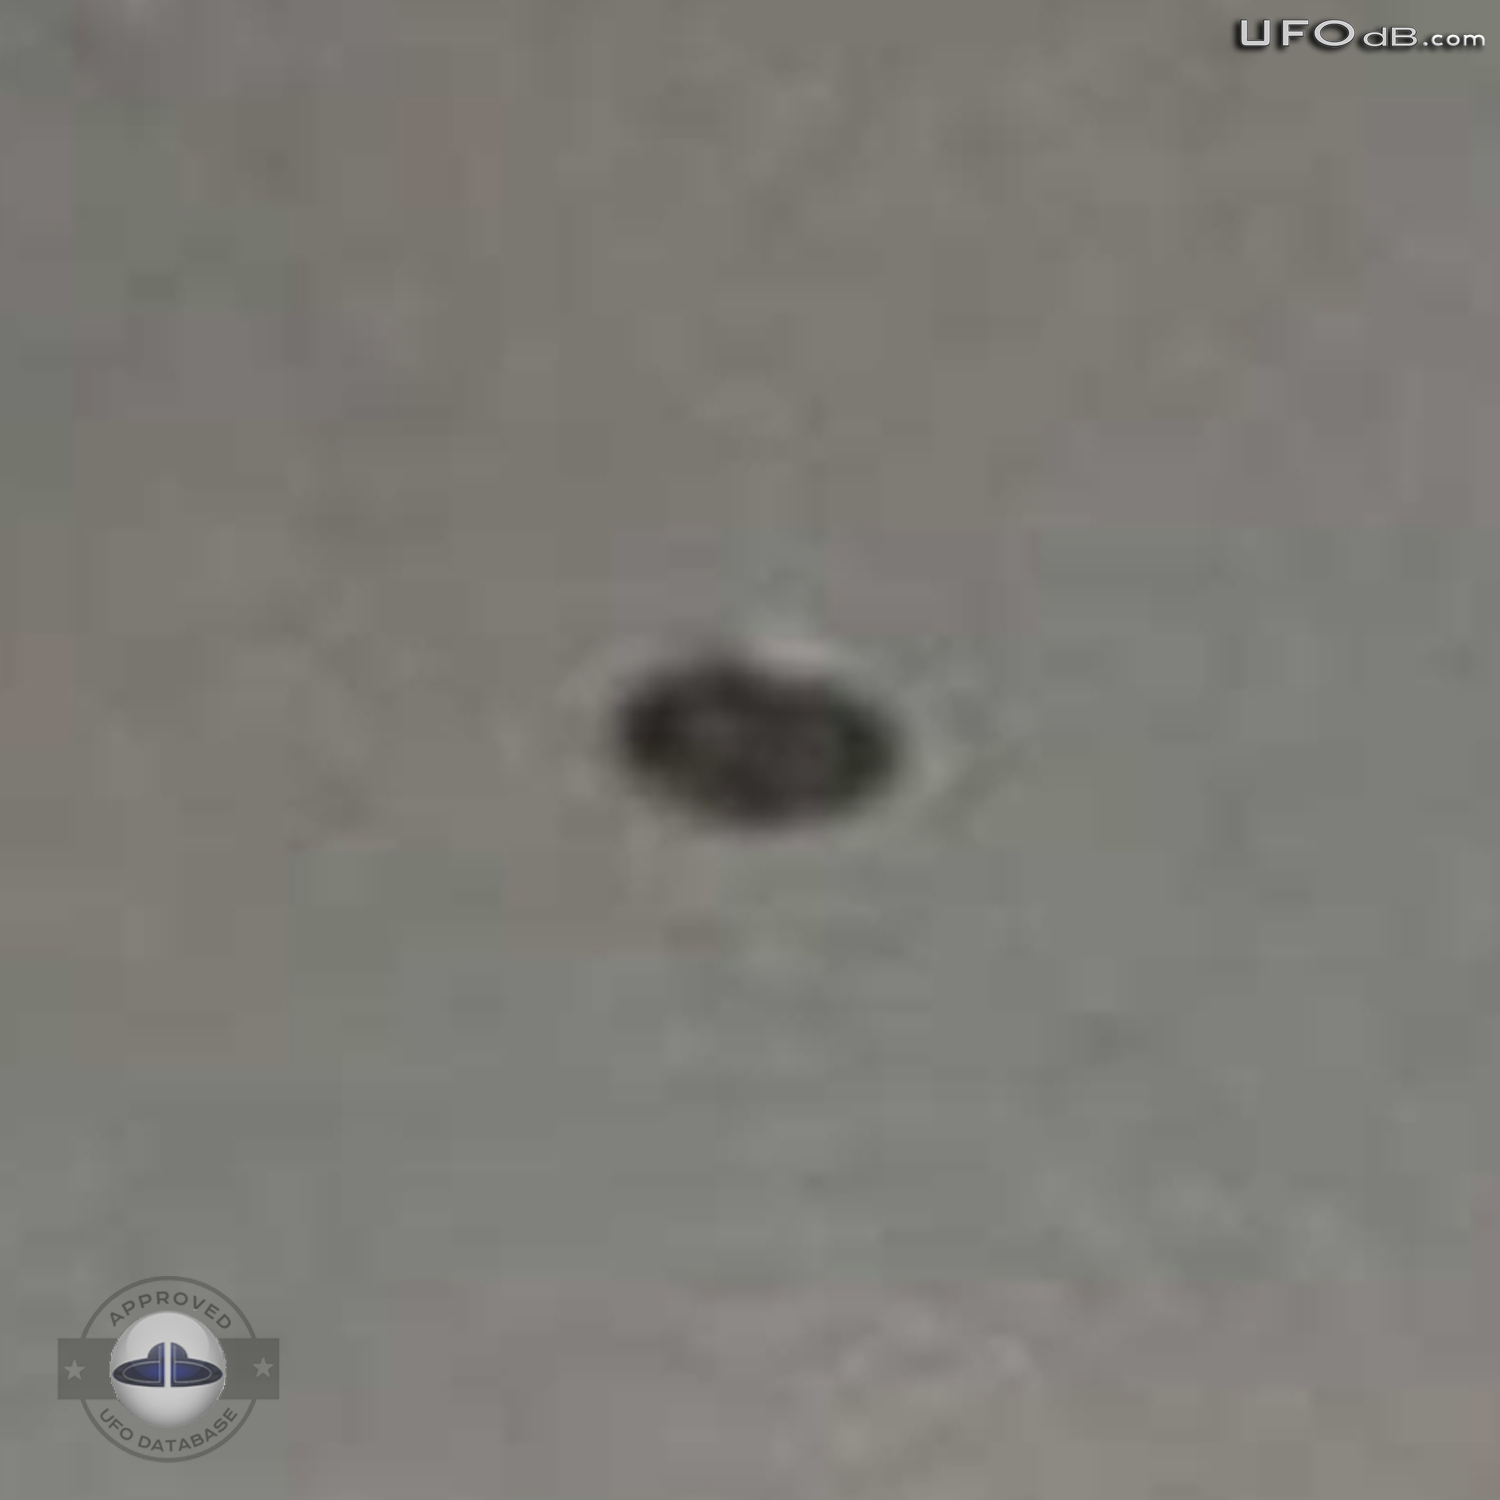 Old Grey 1956 Saucer UFO picture from Rio de Janeiro Brazil UFO Picture #370-4